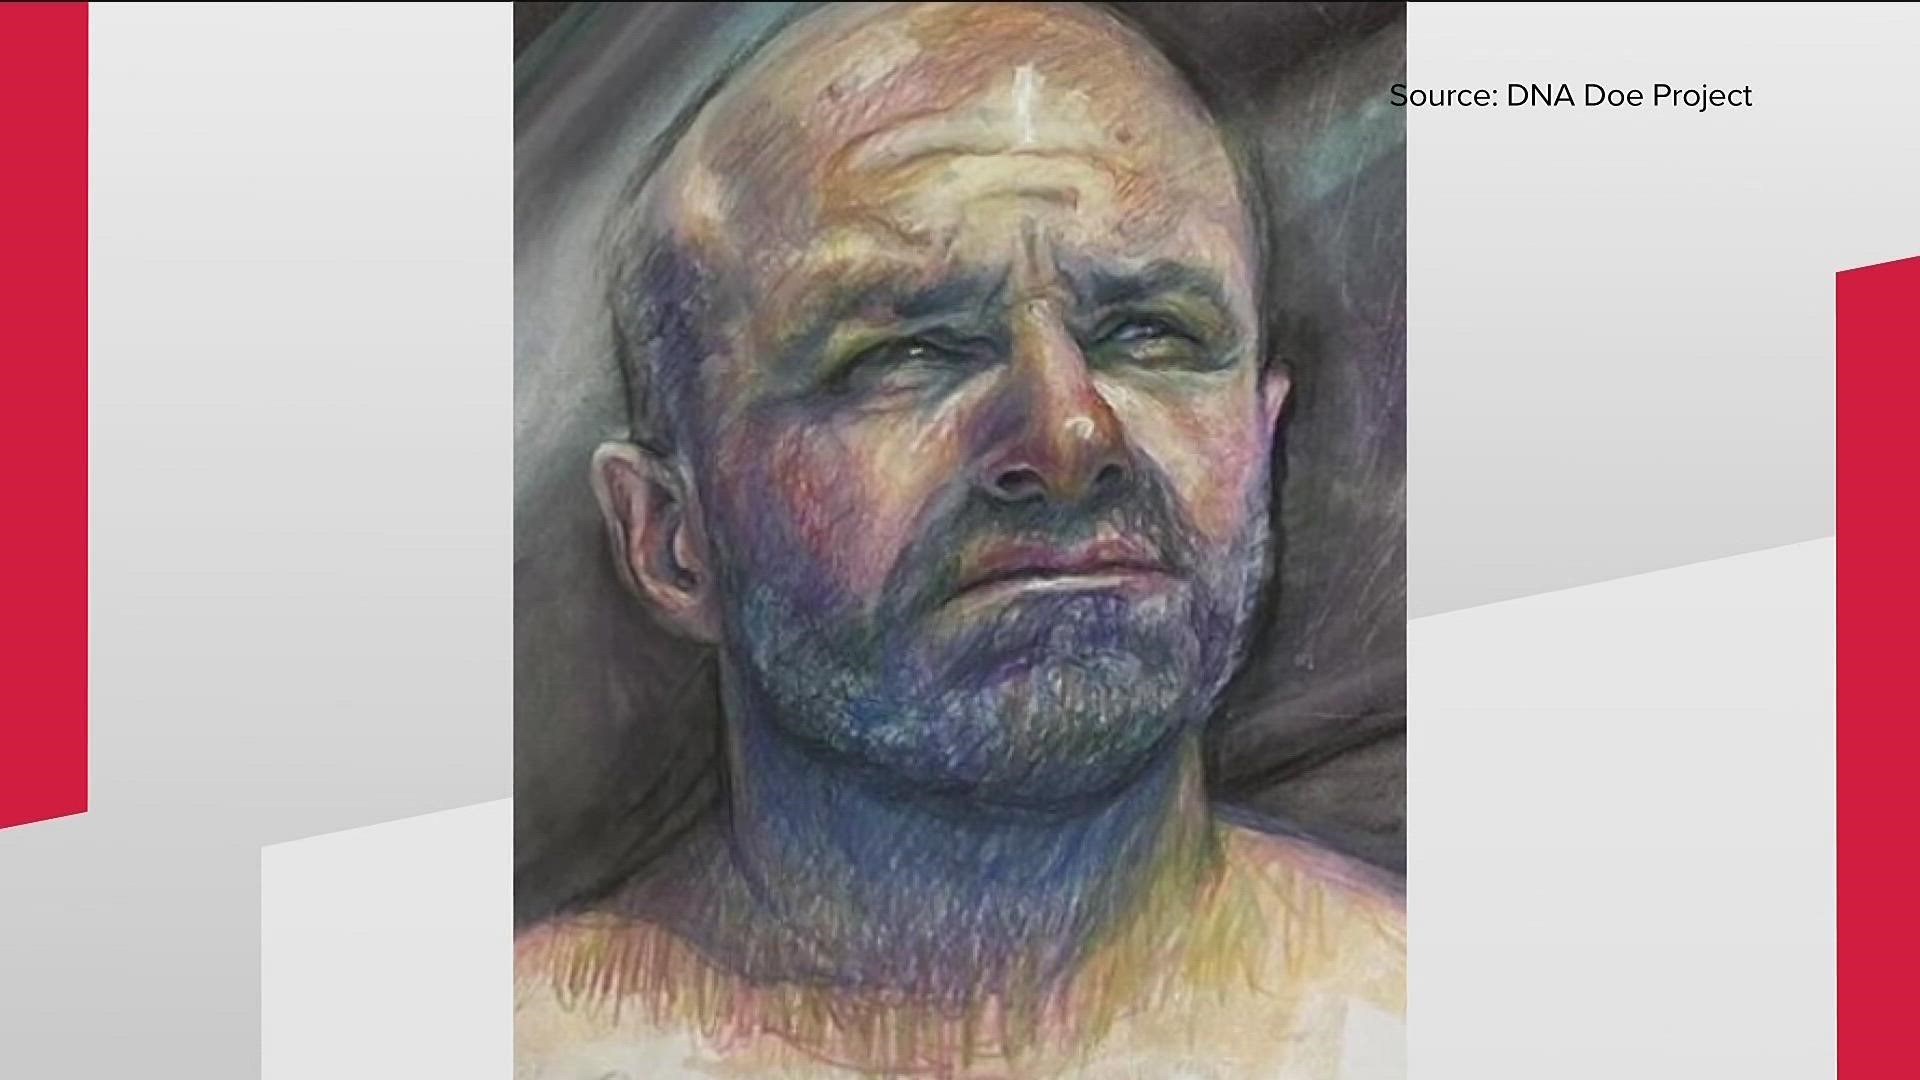 A nearly 20- year mystery is solved. Investigators finally identified the remains of a man found in Gwinnett County.